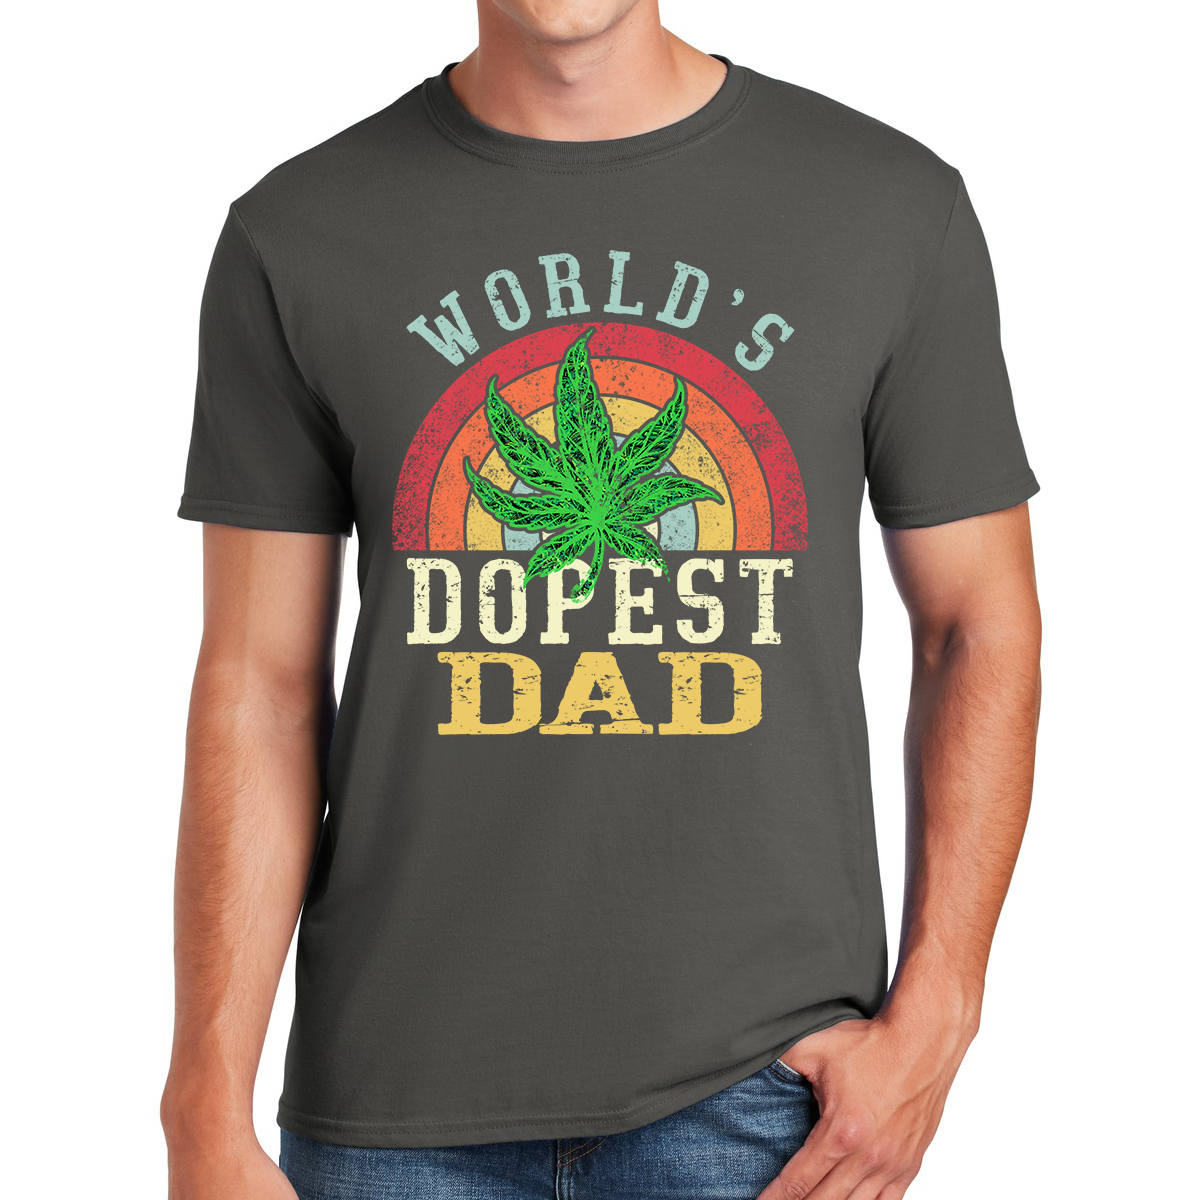 World's Dopest Dad Rocking Fatherhood With Style And Love Awesome Dad T-shirt